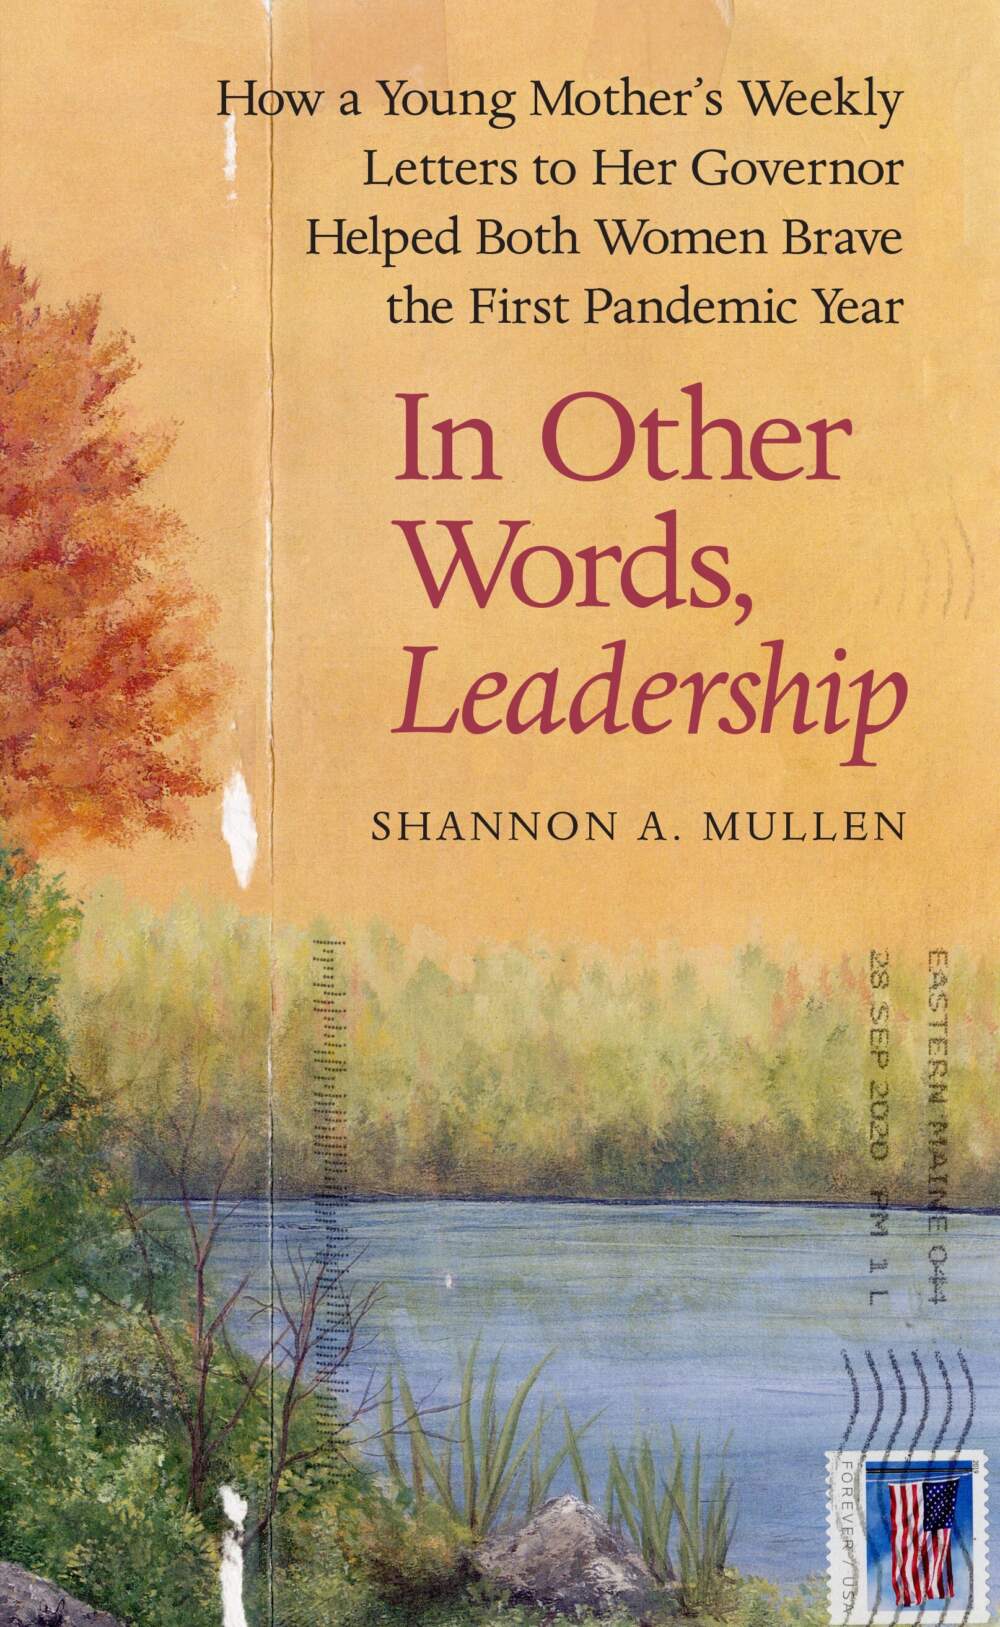 The cover of “In Other Words, Leadership." (Courtesy)